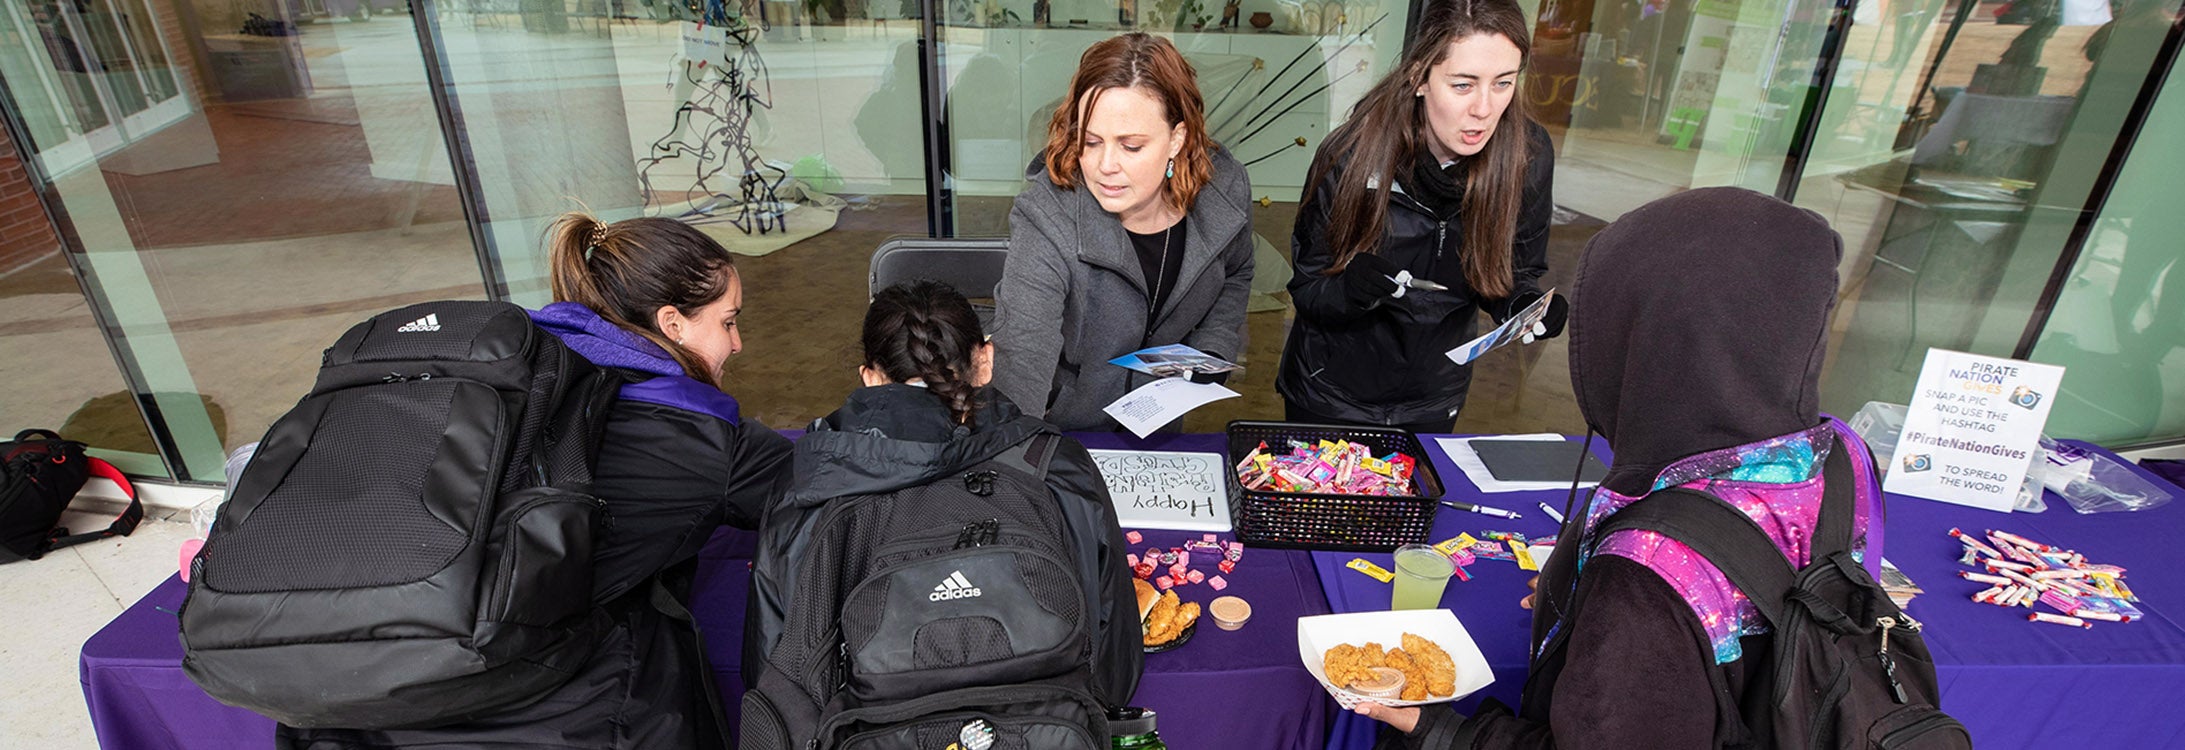 Associate Dean of Students Lauren Thorn, left, and Carter Morsell, donor relations coordinator for the Division of Student Affairs Office of Development, talks to students at the Pirate Nation Gives table outside of the Main Campus Student Center on Wednesday.